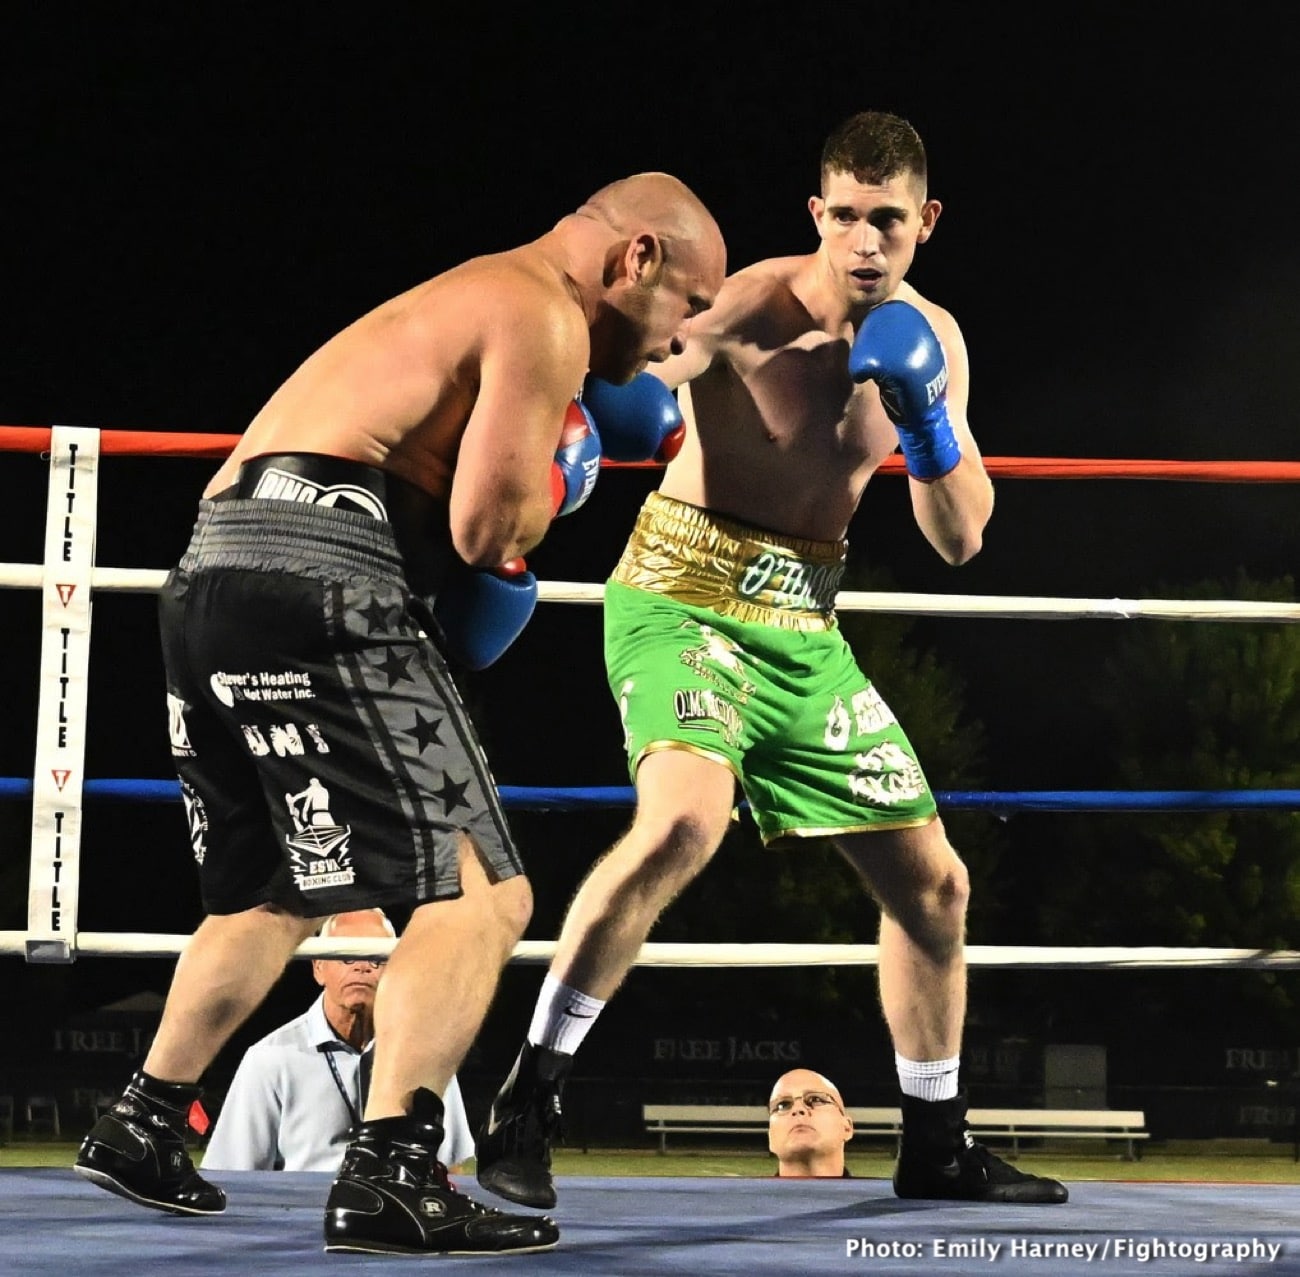 Mike Ohan Defeats Harry Gigliotti - Boxing Results